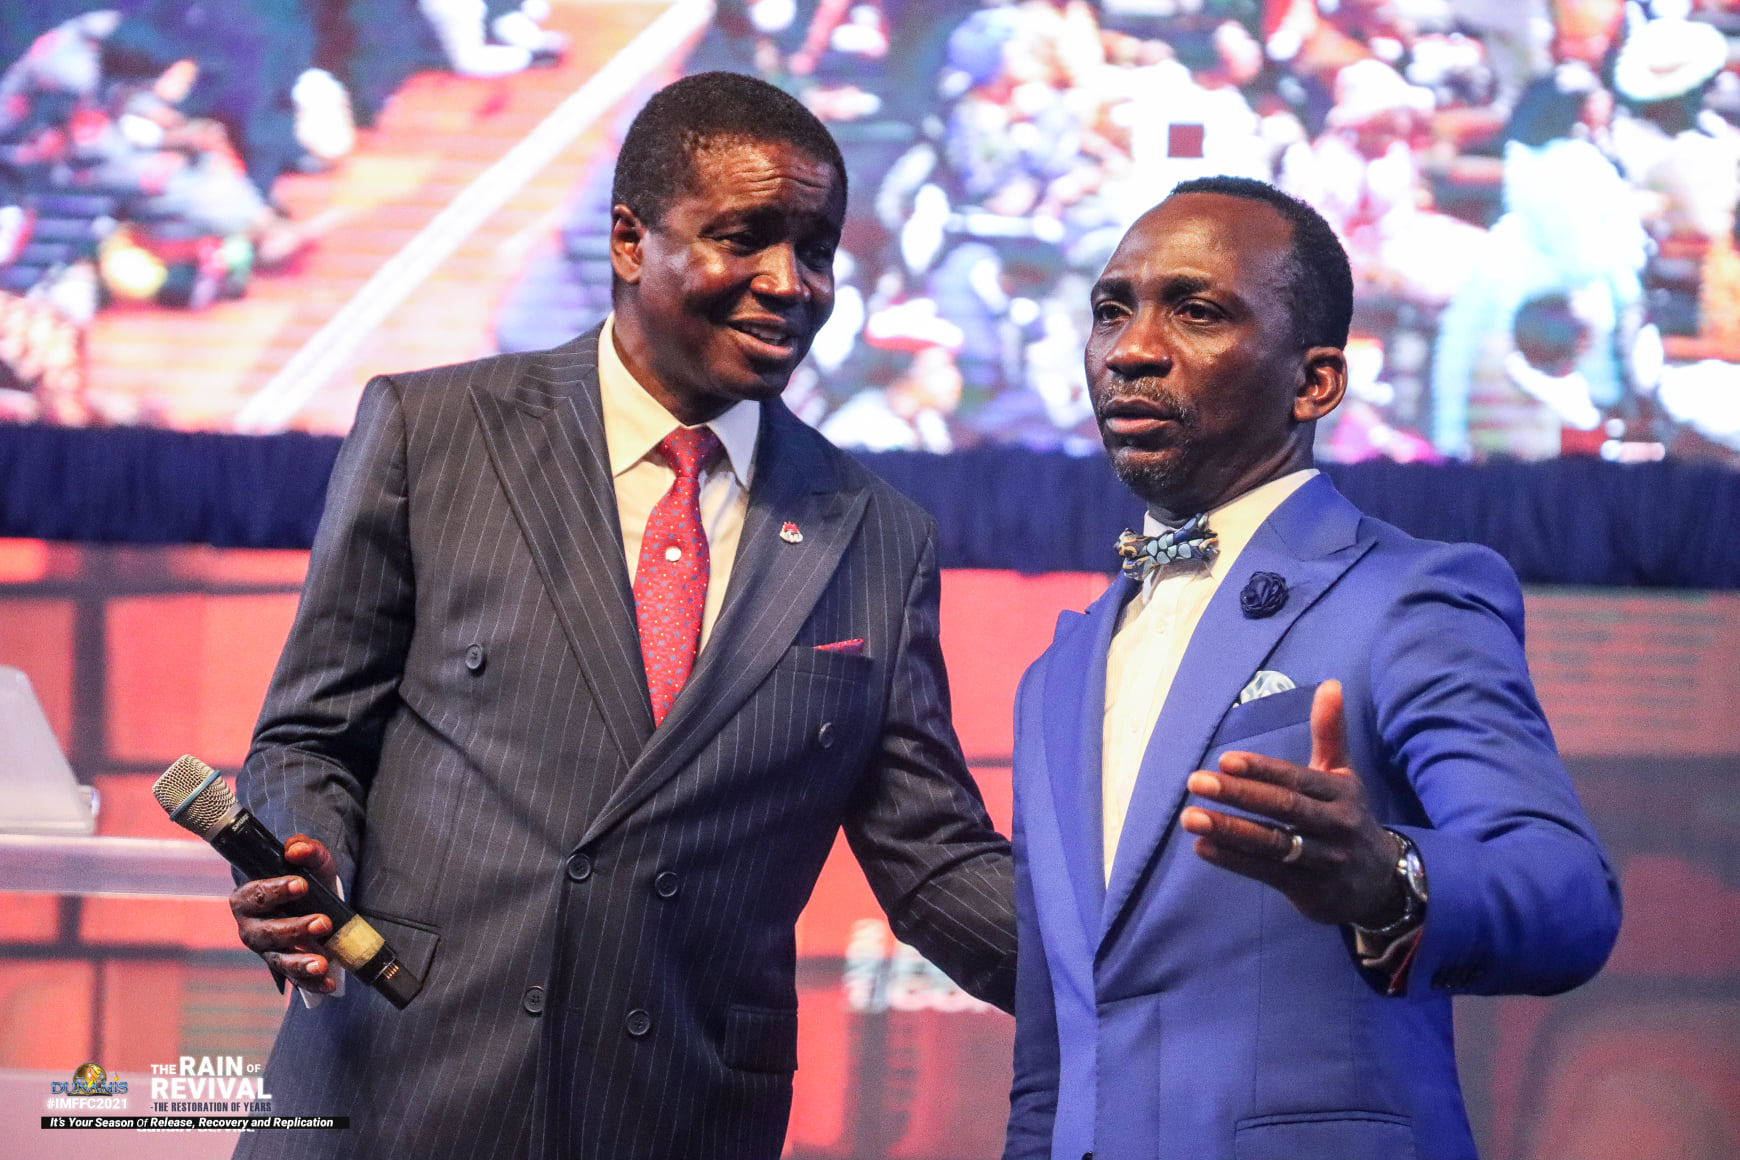 Provoking And Sustaining Revival By Engaging In Kingdom Stewardship mp3 By Bishop David Abioye